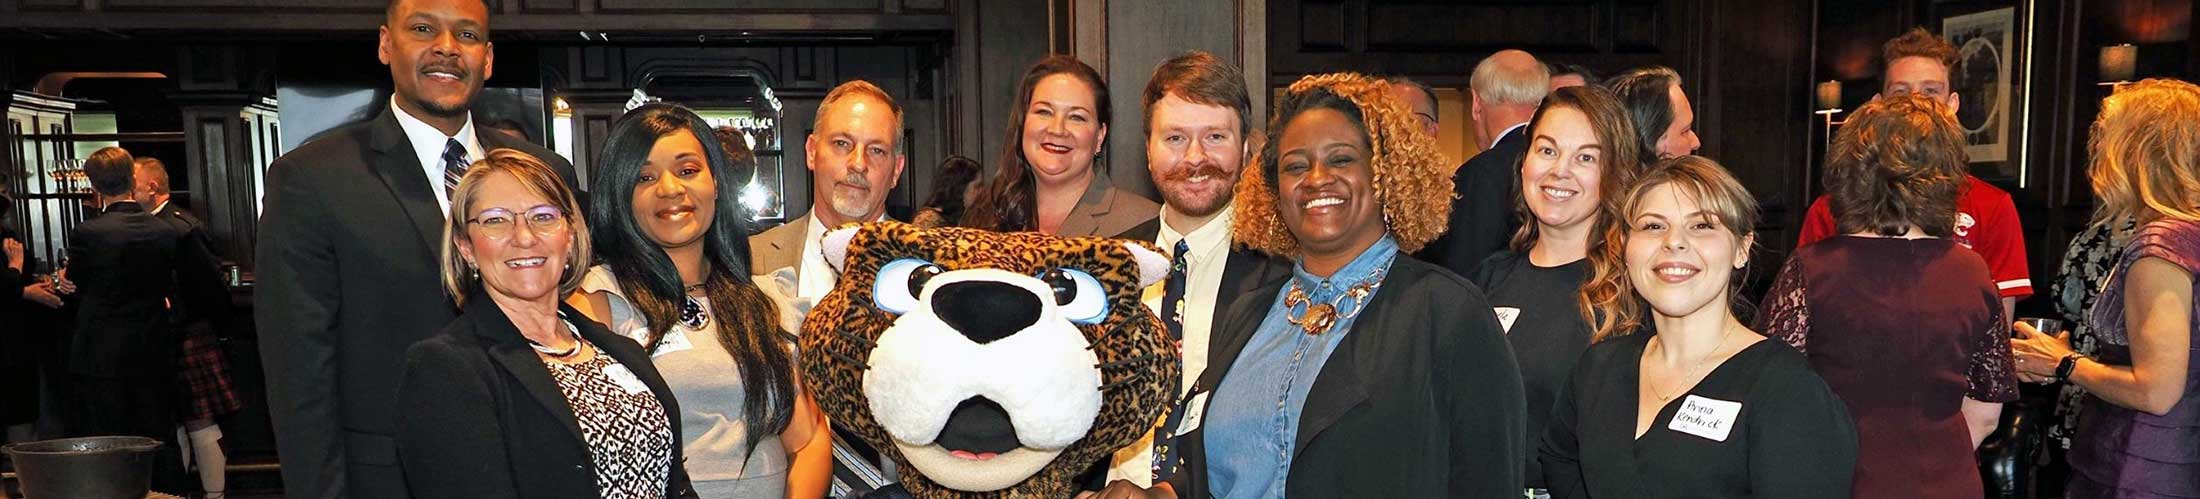 Group image from spring celebration with Mr. Paw